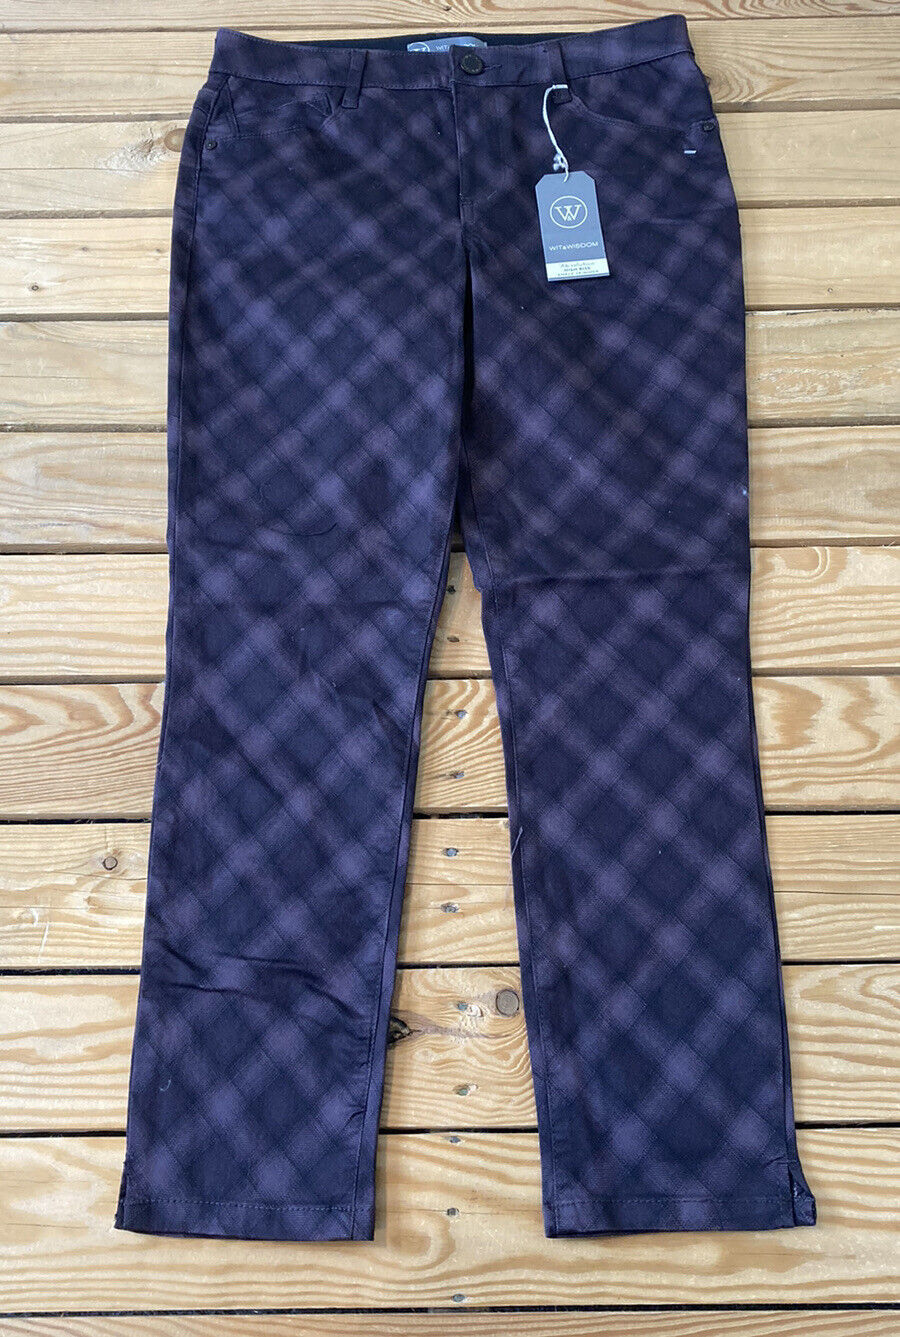 Primary image for wit & wisdom NWT women’s high Rise ankle skimmer jeans Size 6 Purple Plaid L7